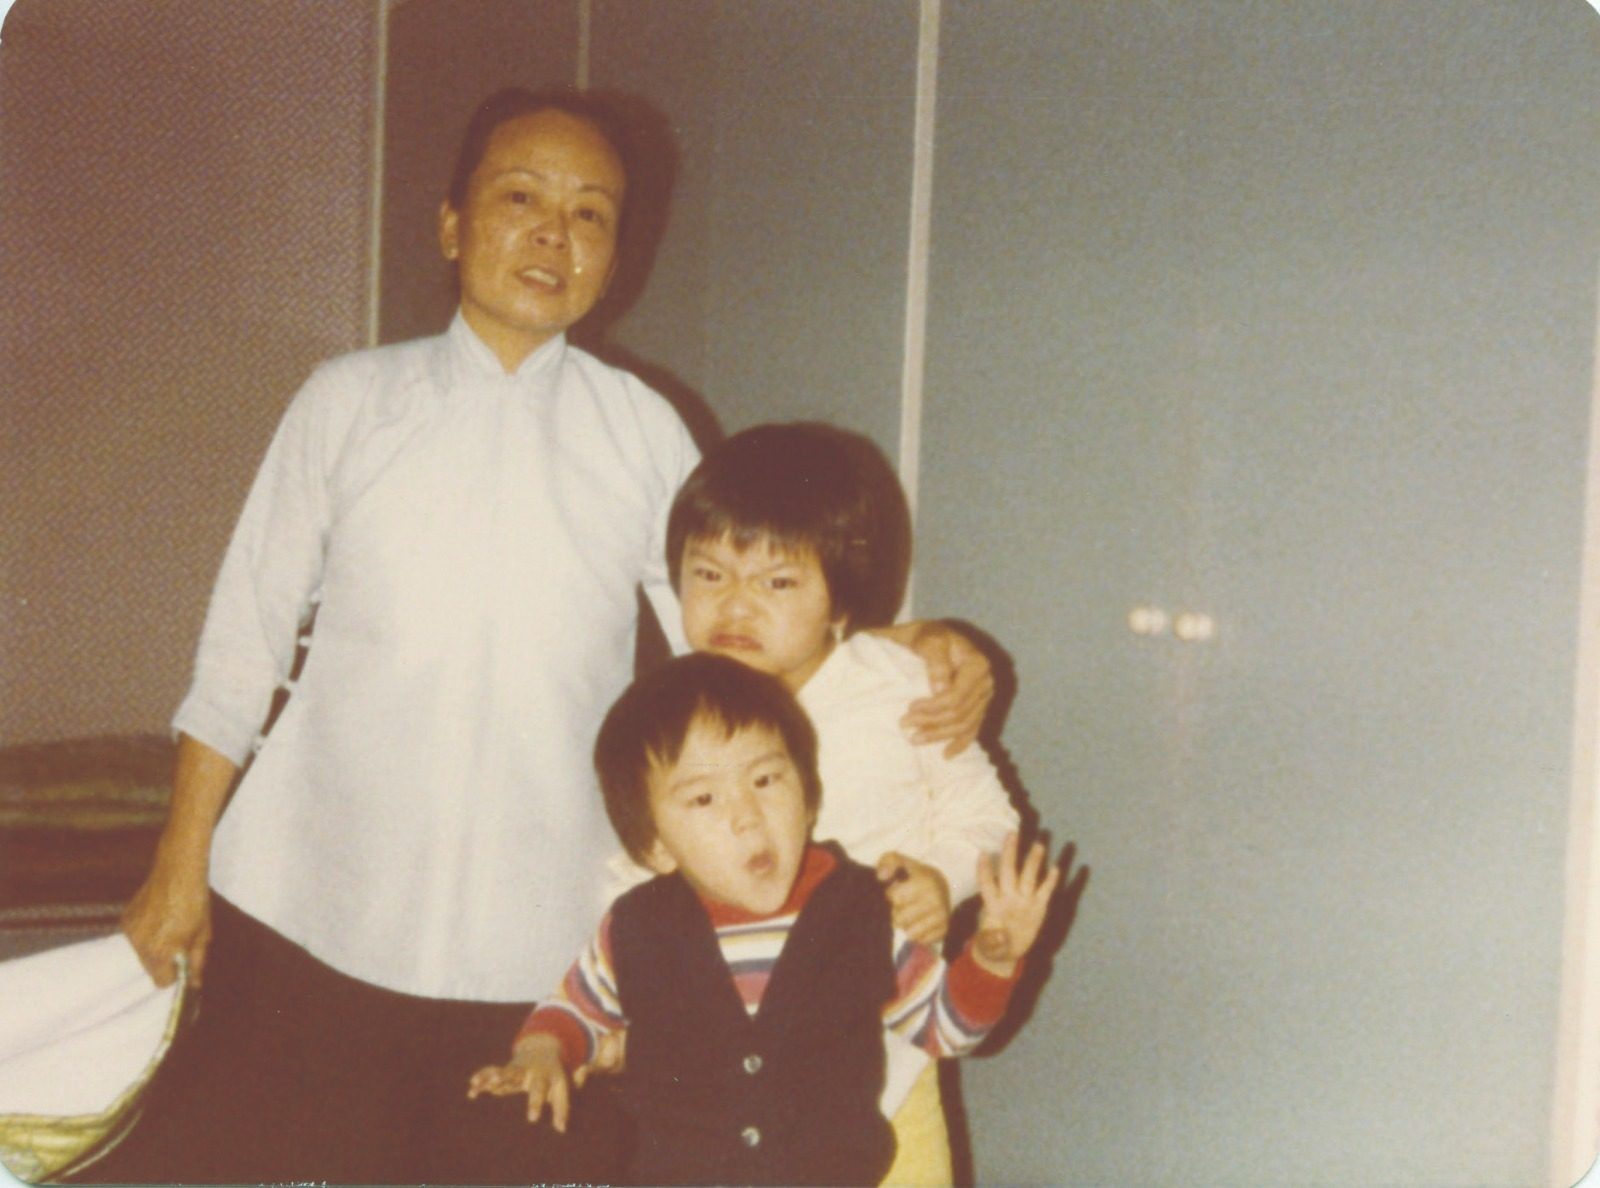 Mak (left), a “self-combed woman” from China’s Guangdong province who chose not to get married and became a domestic helper, with Hong Kong artist Kurt Tong (front) and his older brother. Photo: courtesy of Kurt Tong